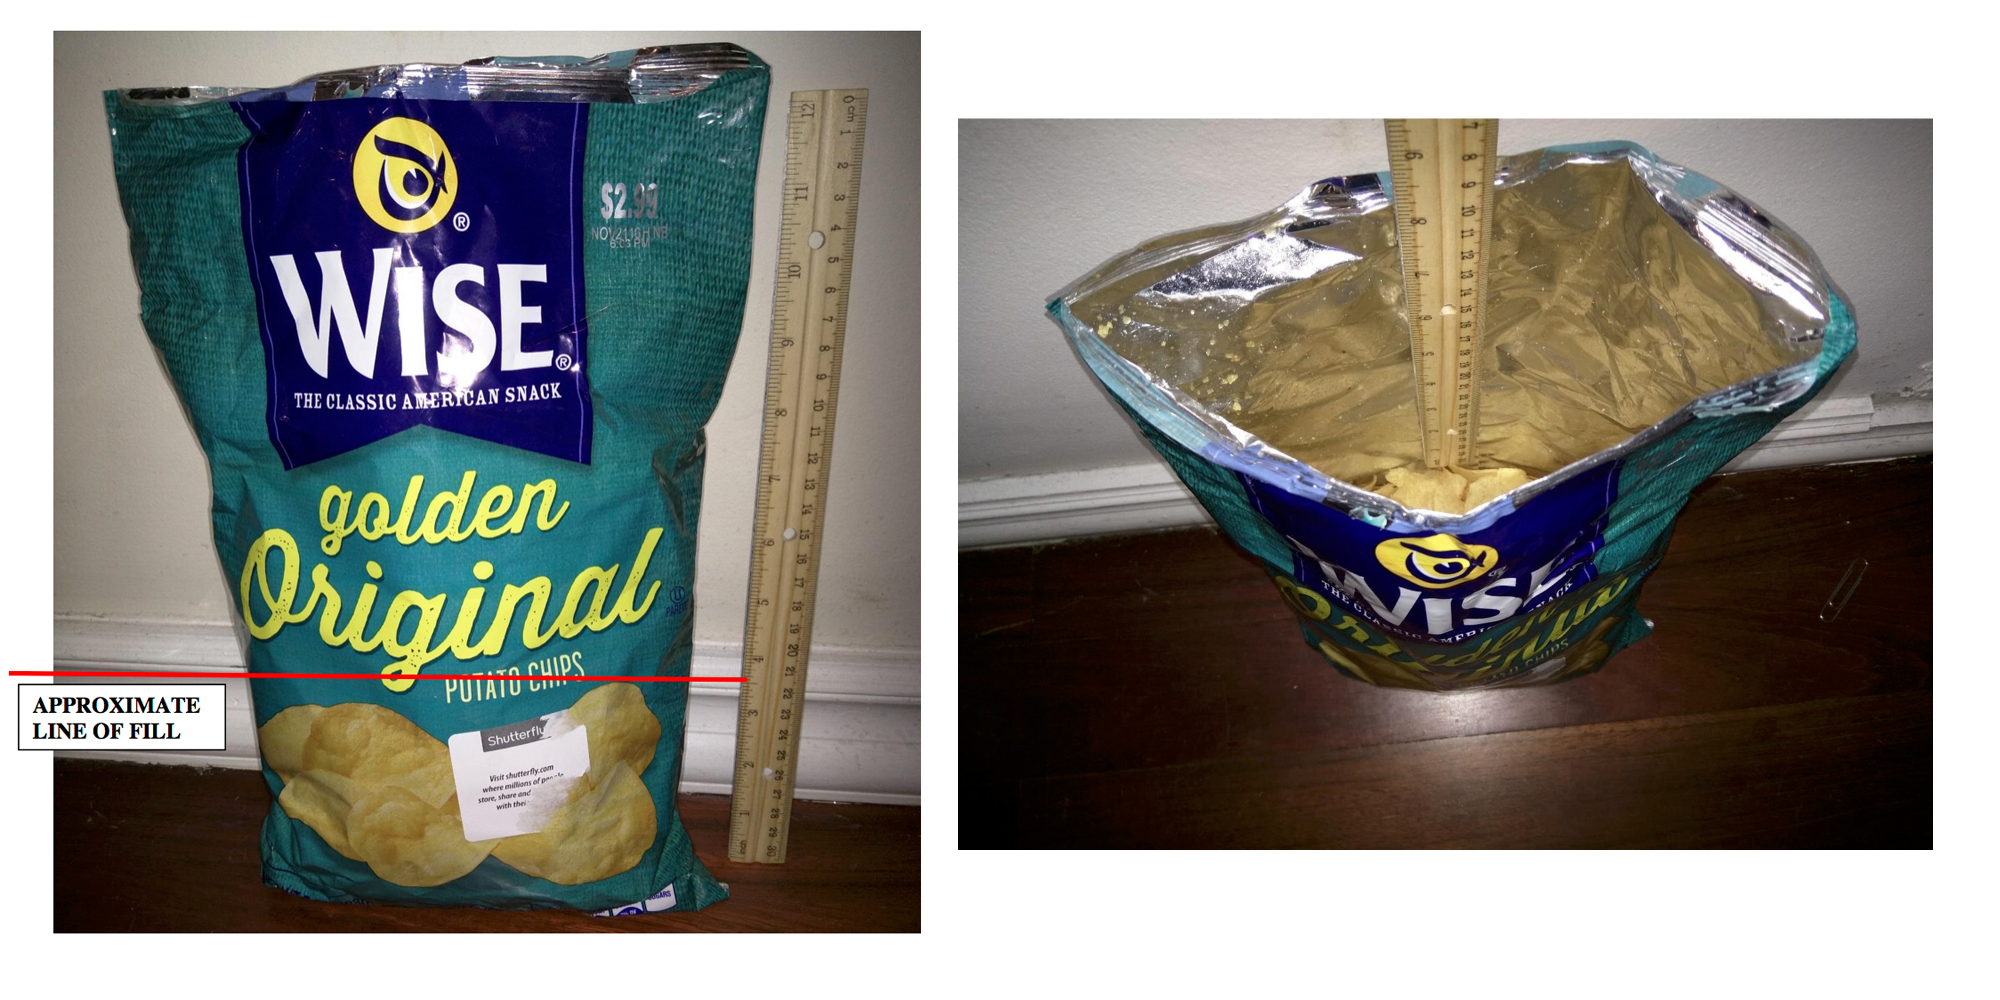 When Does The Extra Space In Your Potato Chip Bag Go From Annoying To Deceptive?